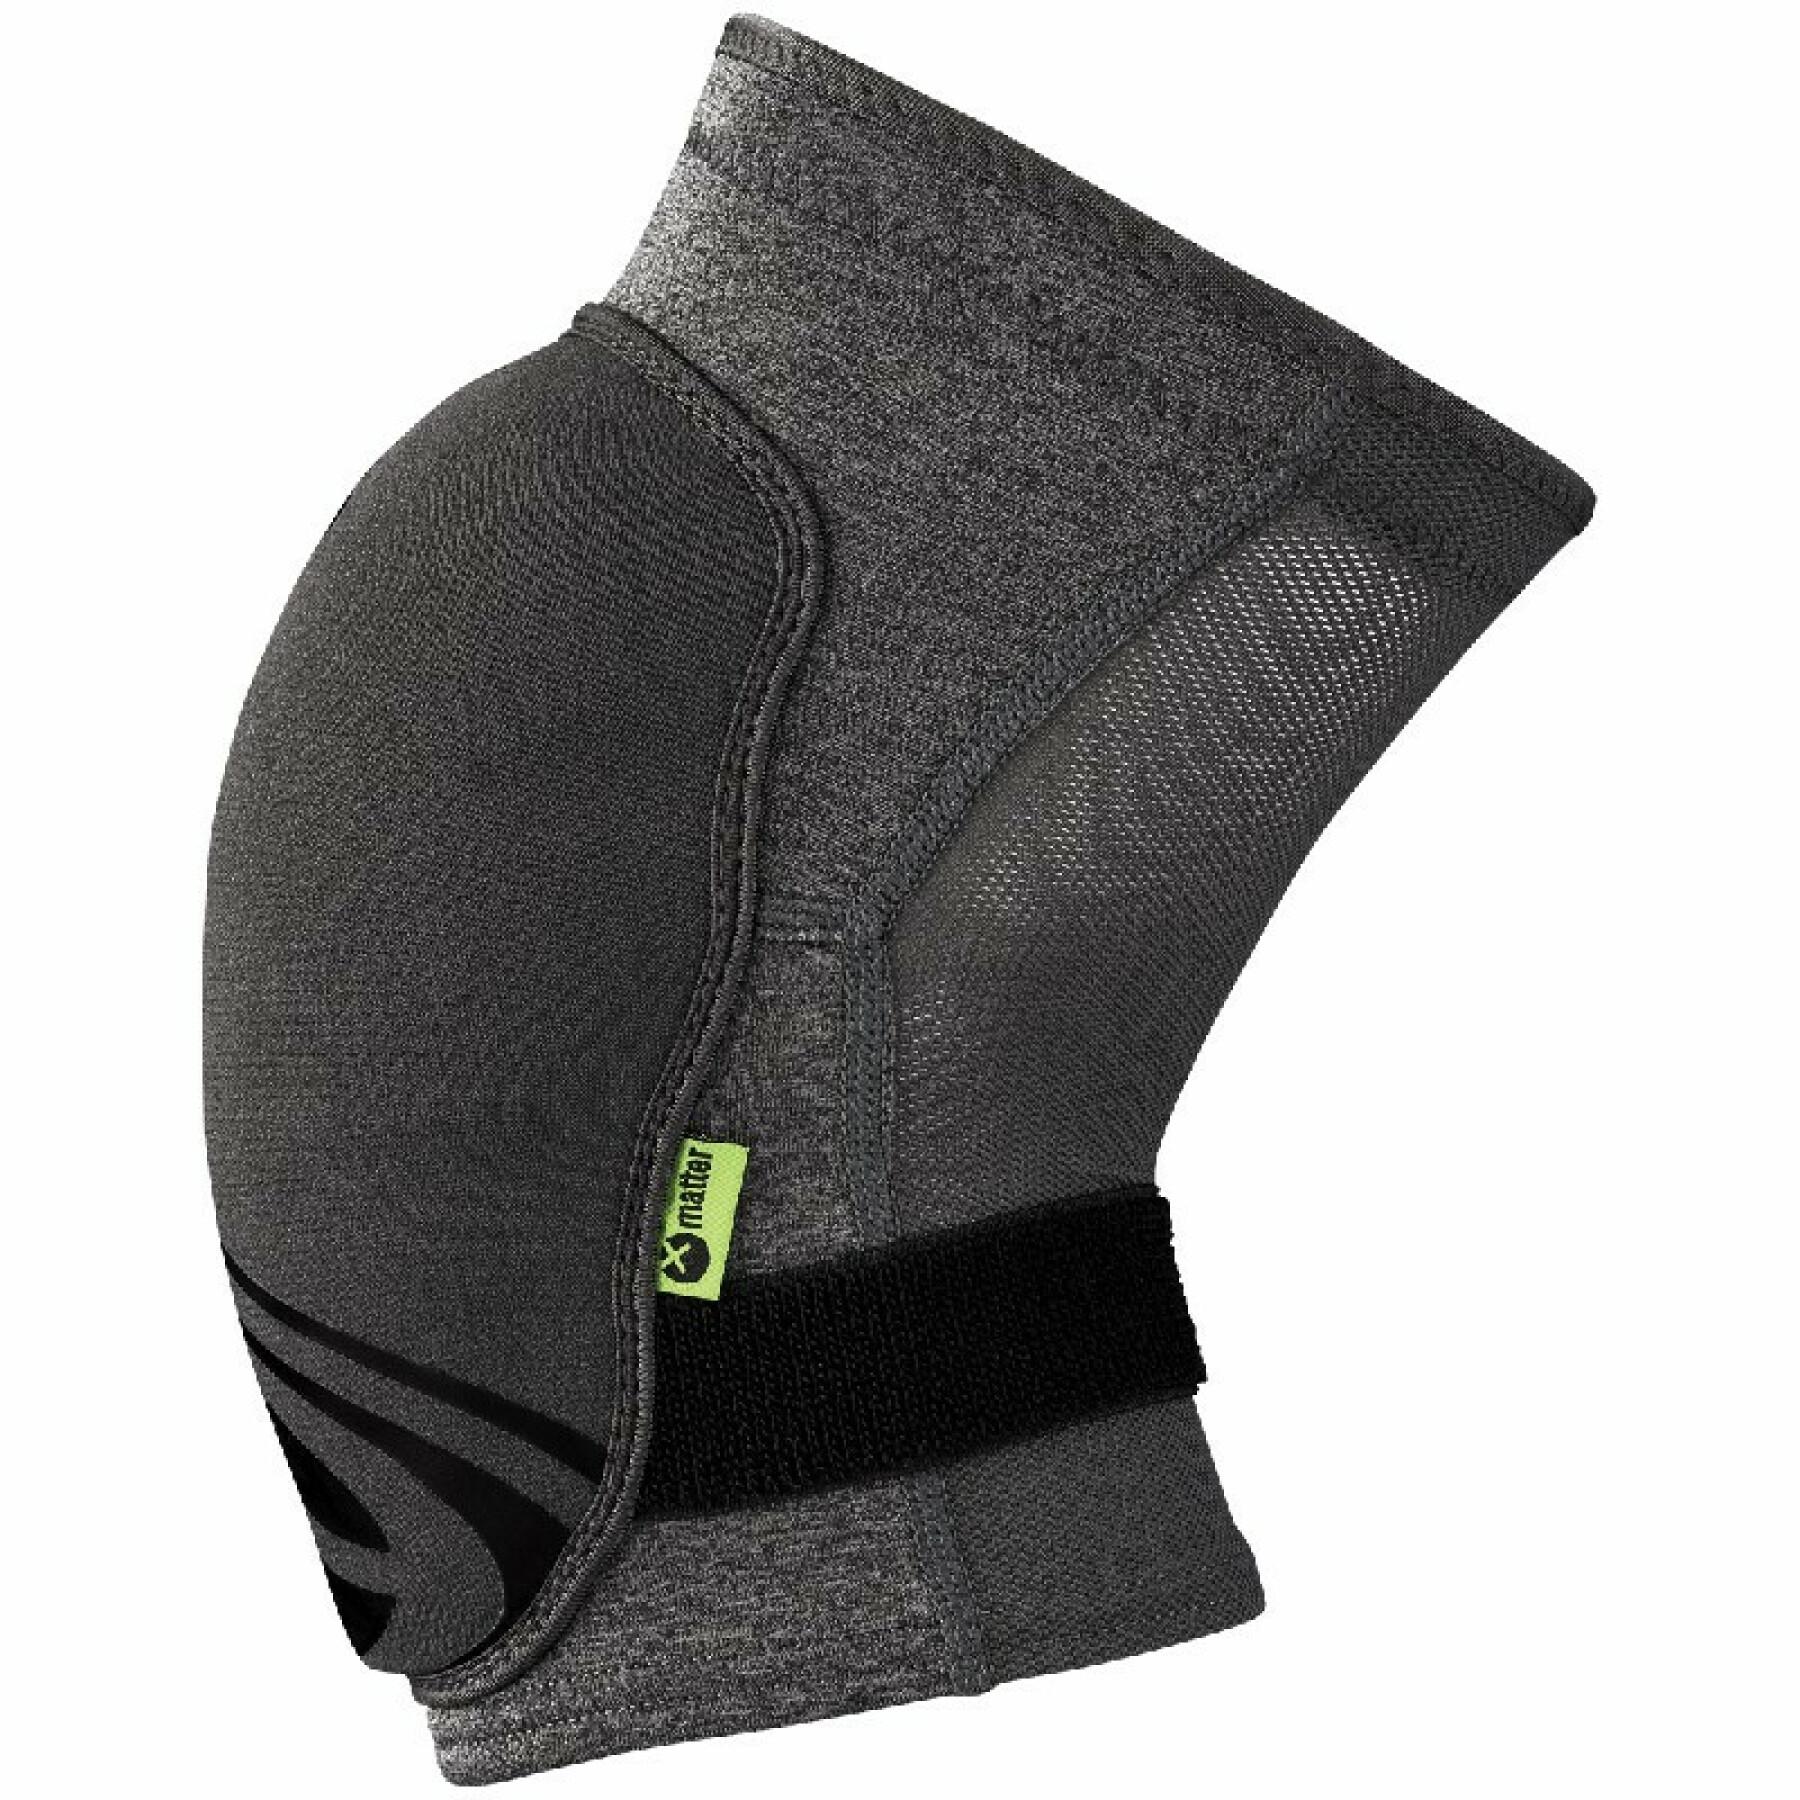 Knee protection for bicycles IXS Flow Zip